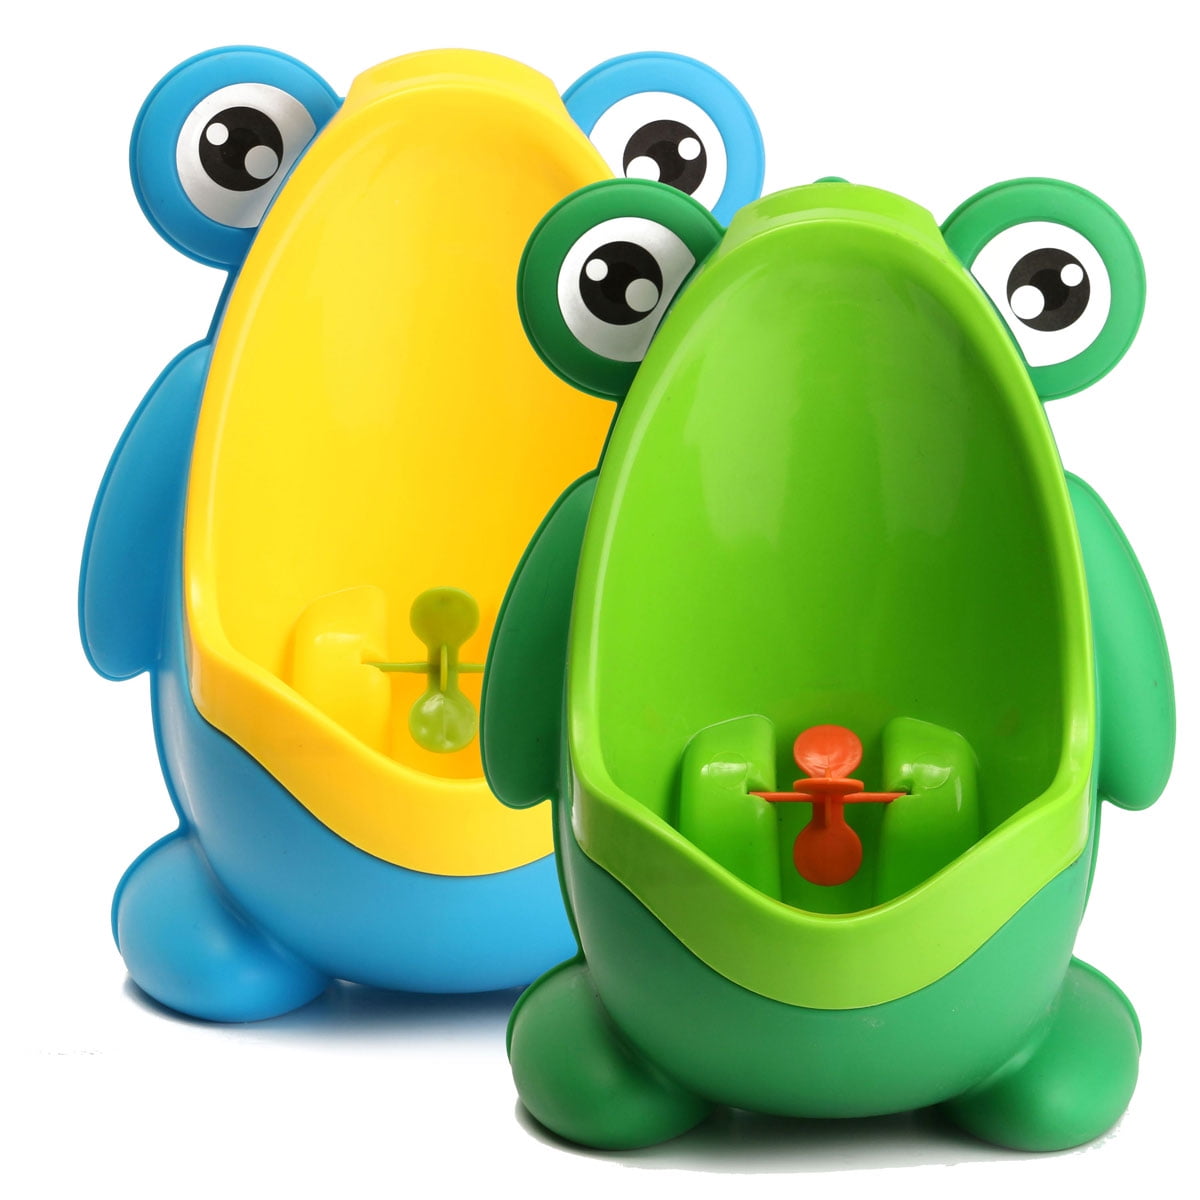 Tomorotec Kids Urinal Trainer with Funny Aiming Target New Cute Frog Potty Training Urinal with Drain Tube for Boys 